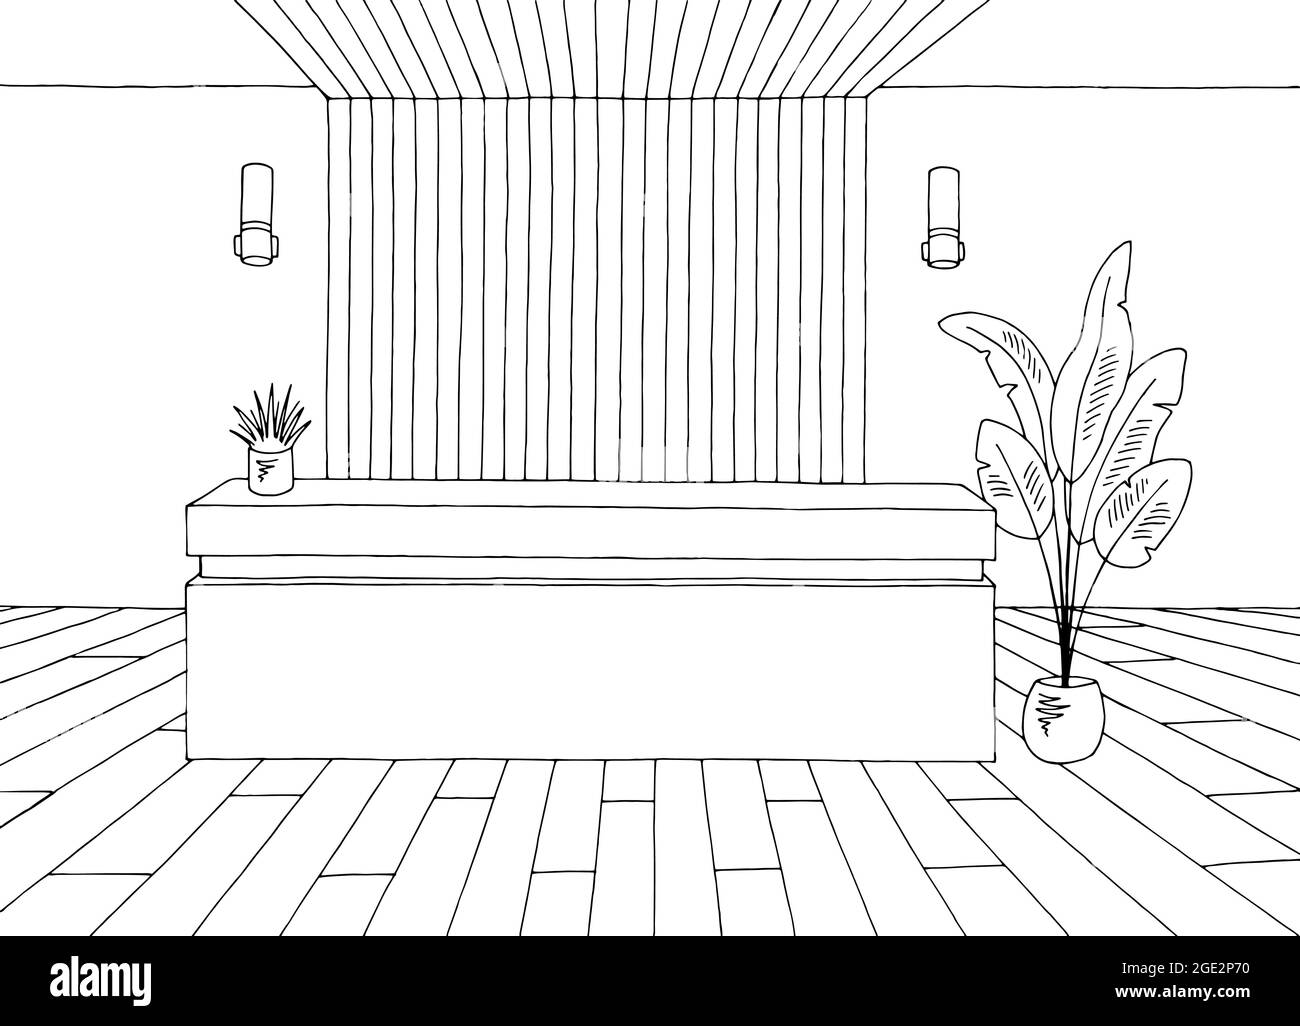 renderingsbyarchitects - Lobby - line drawing